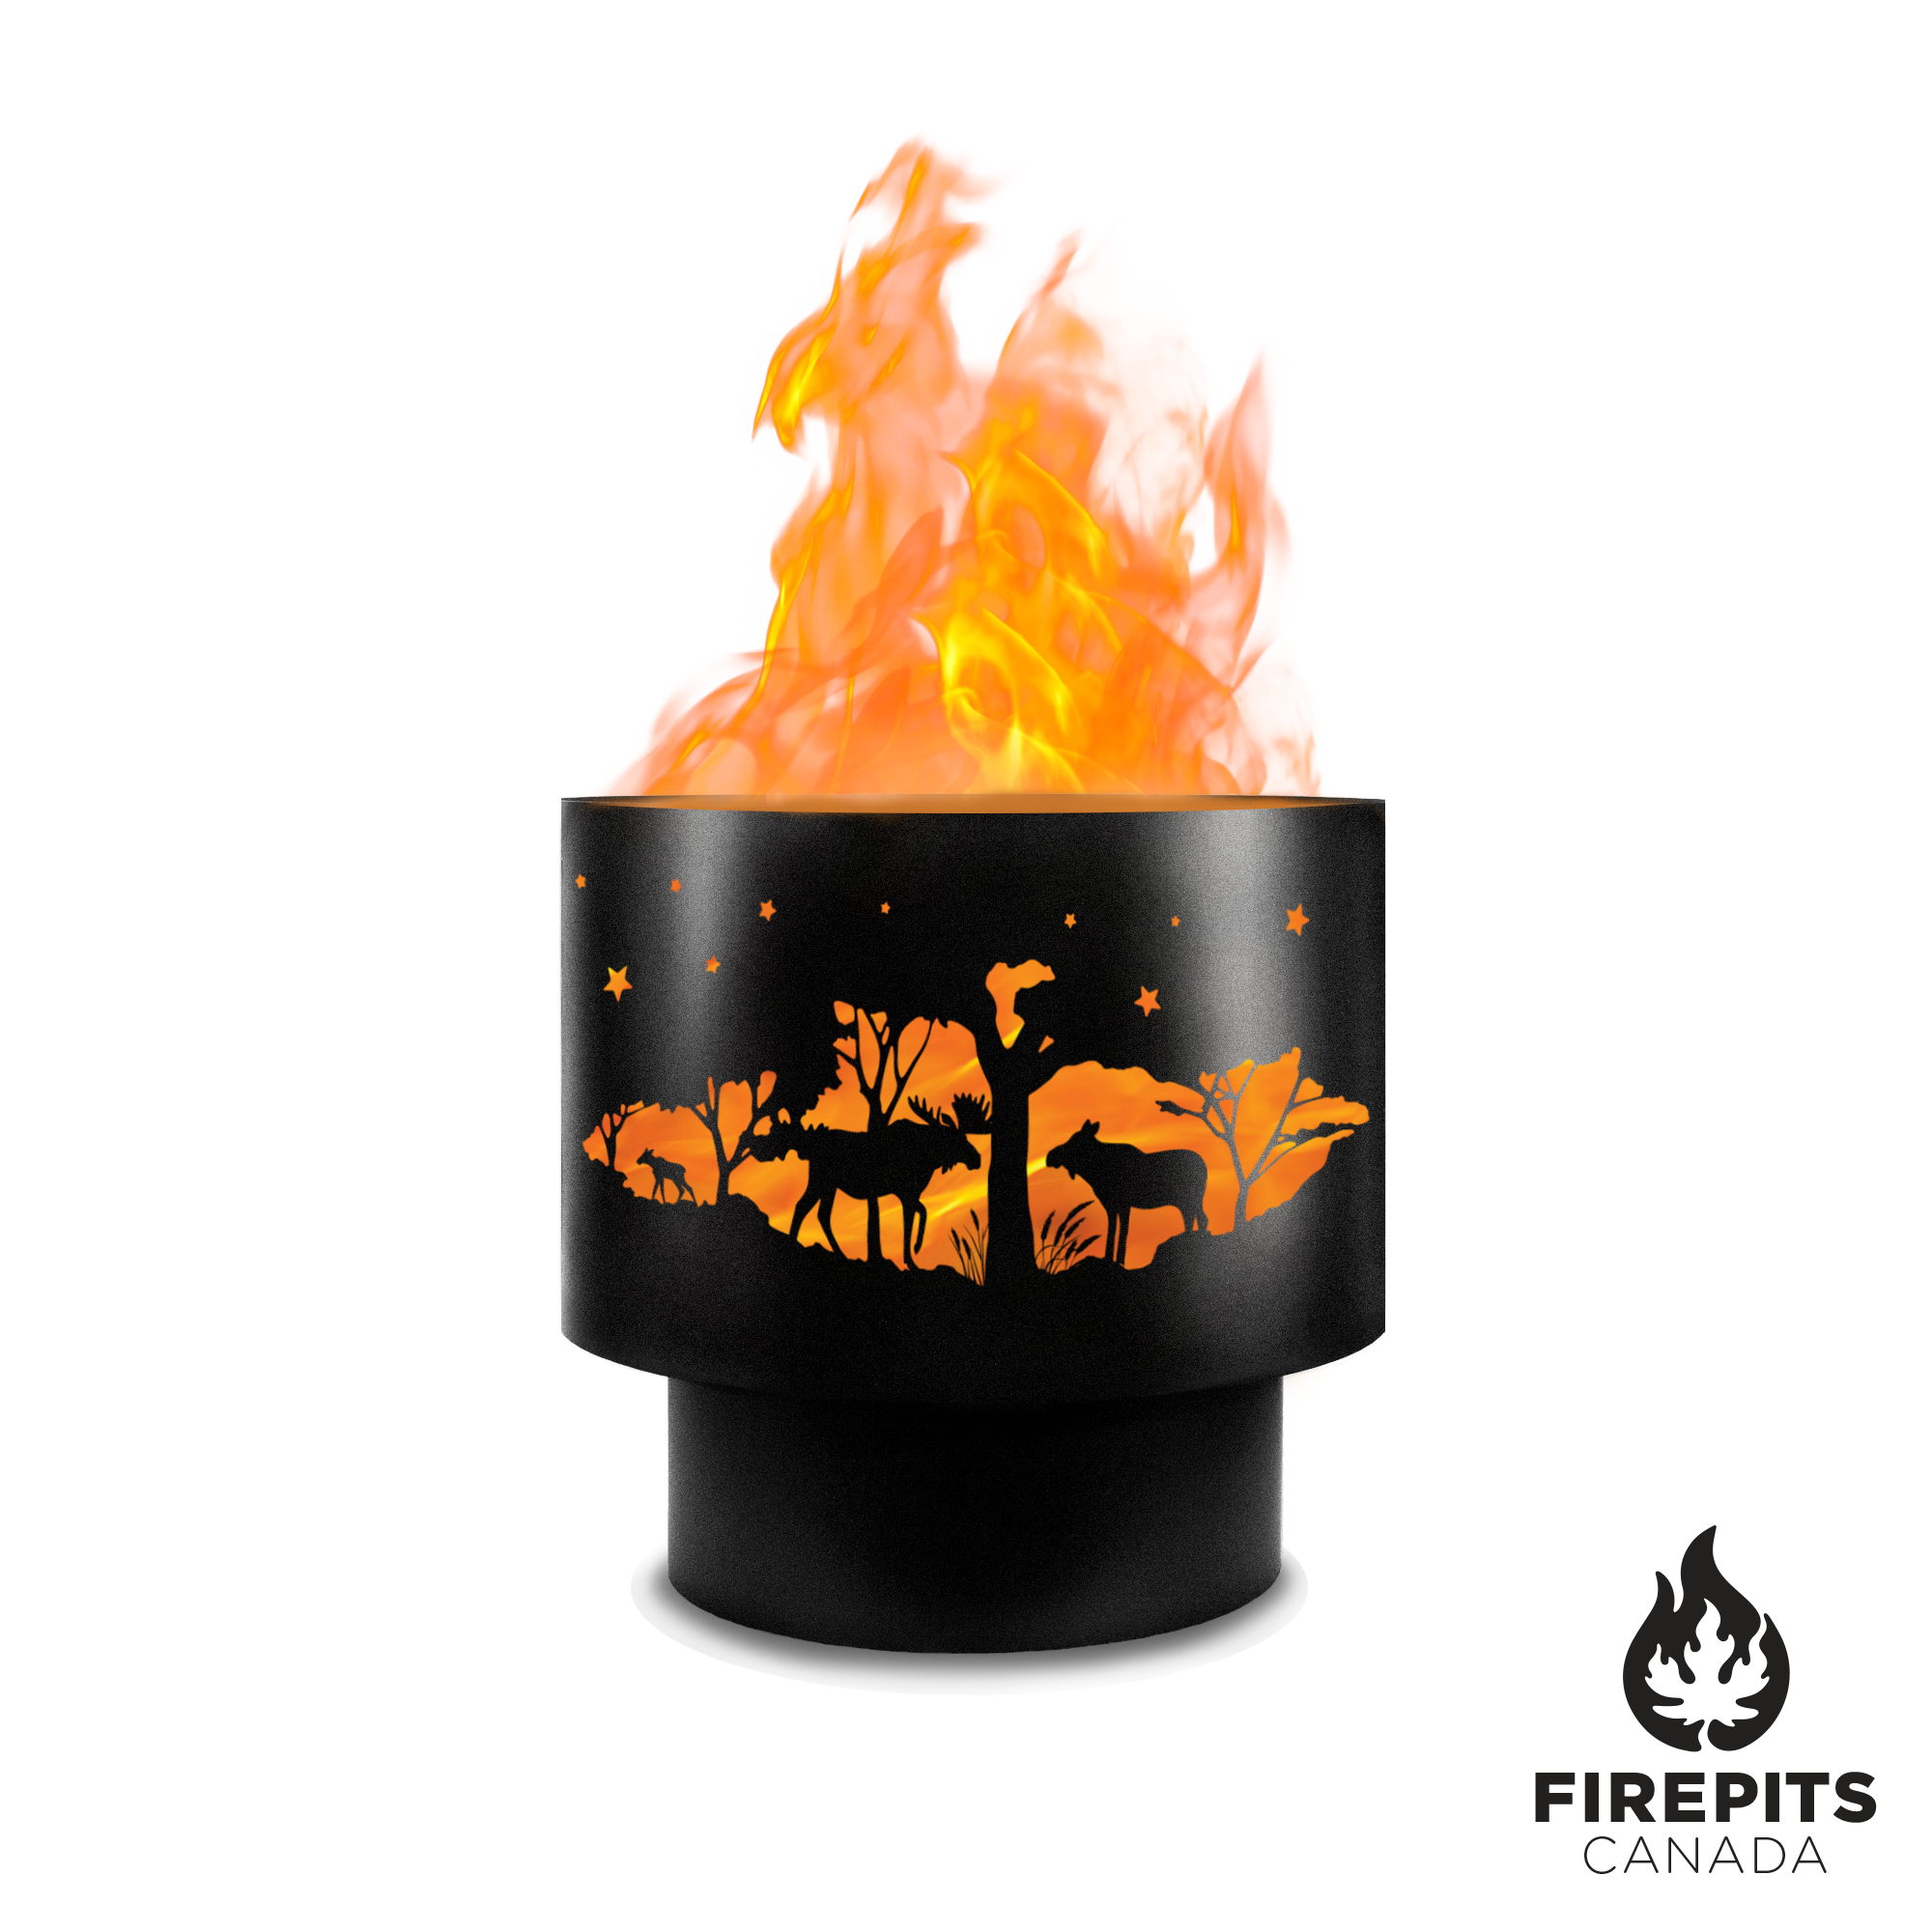 Country Moose Firepit Personalized with Your Text